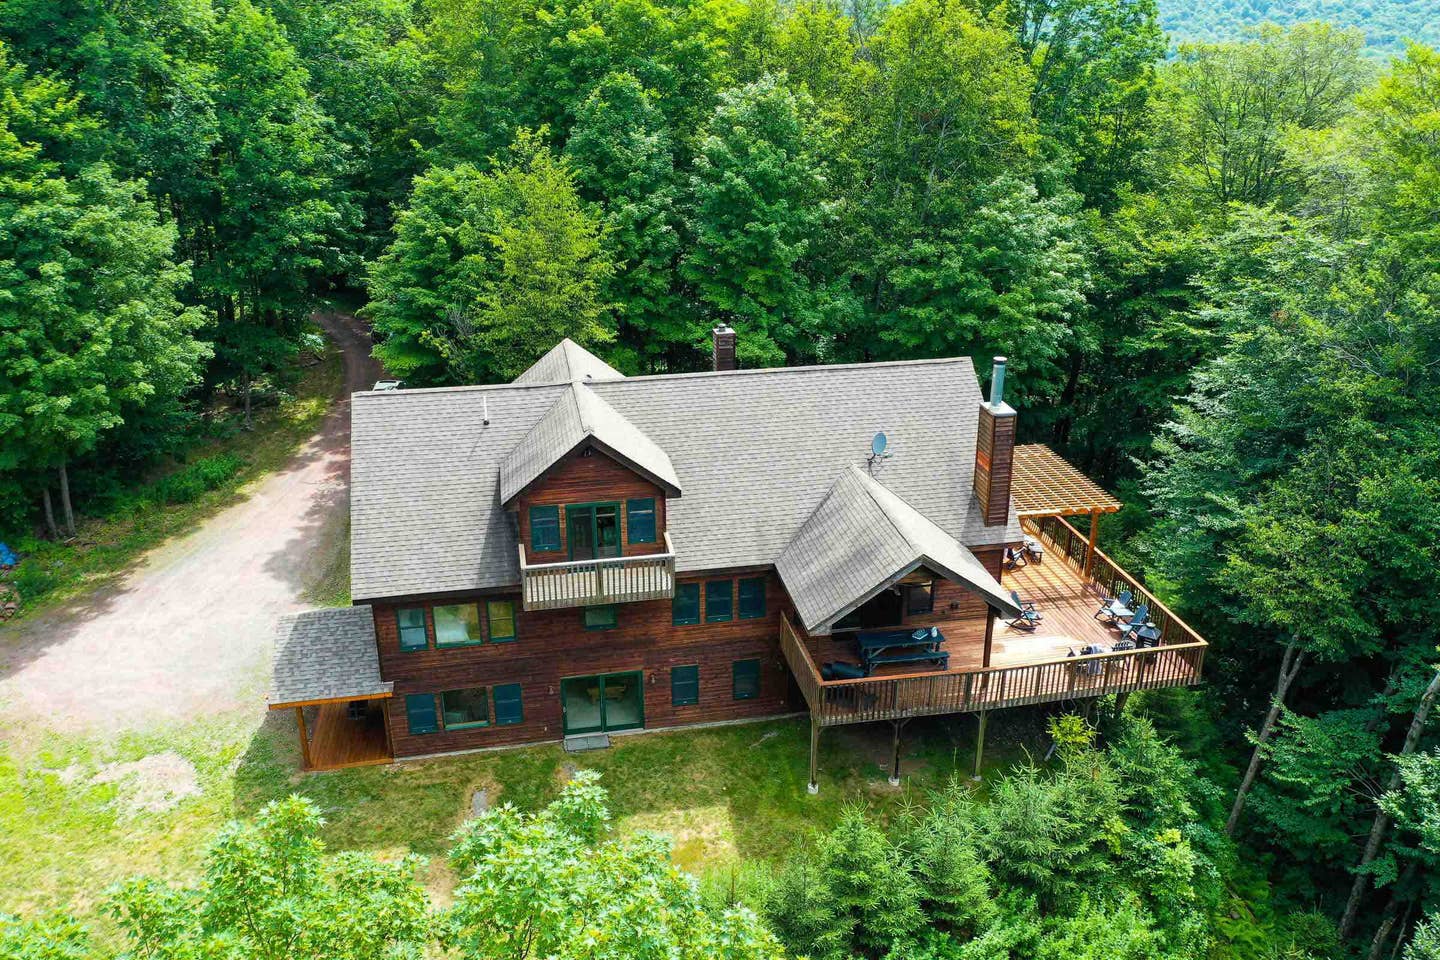 Where To Stay in West Catskills NY - Luxurious Cabin in the Woods